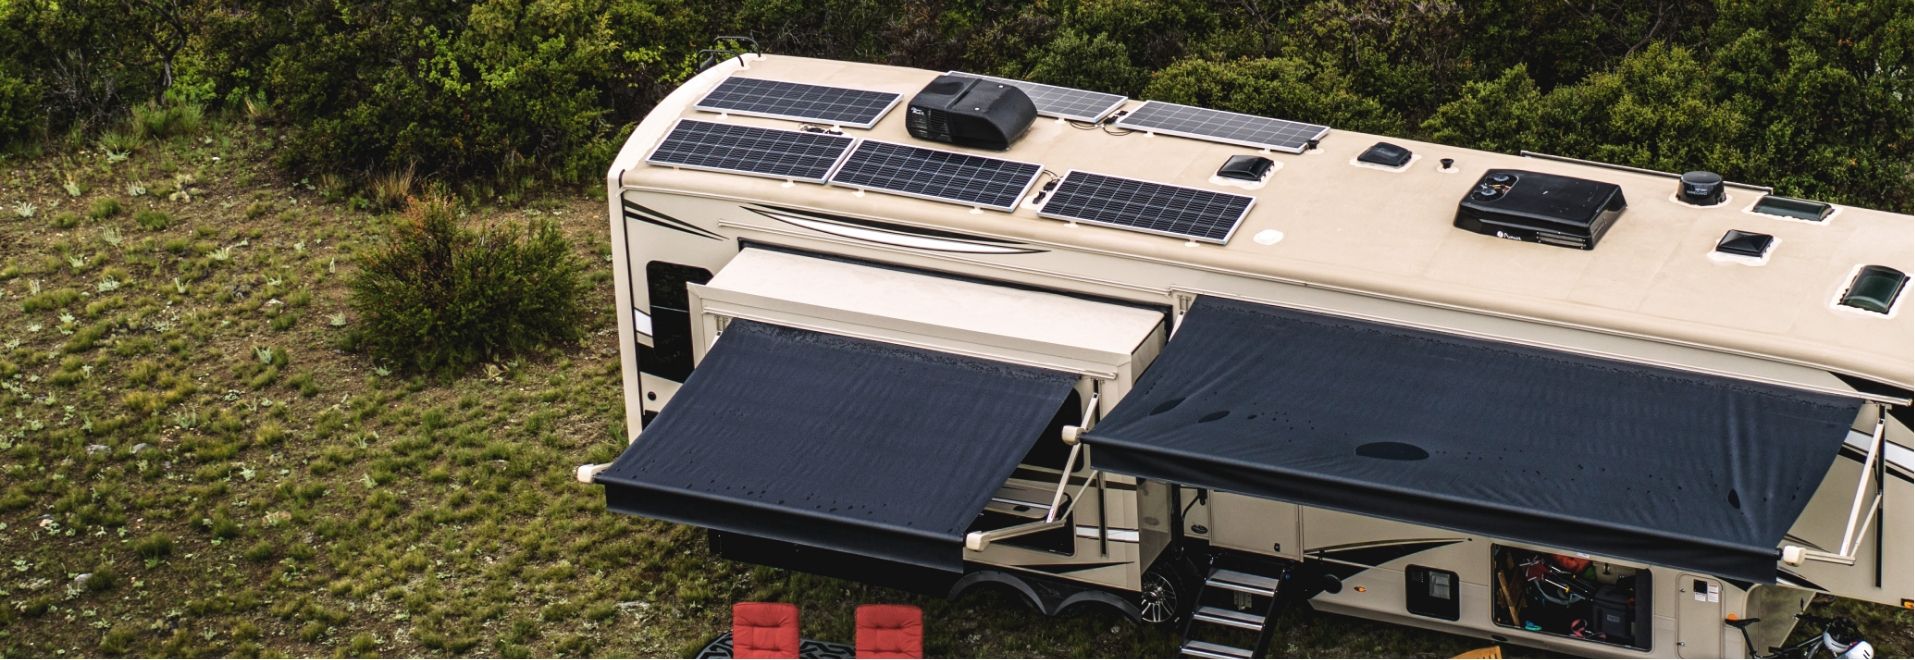 Upgrade your RV with Solar Energy in 7 Steps